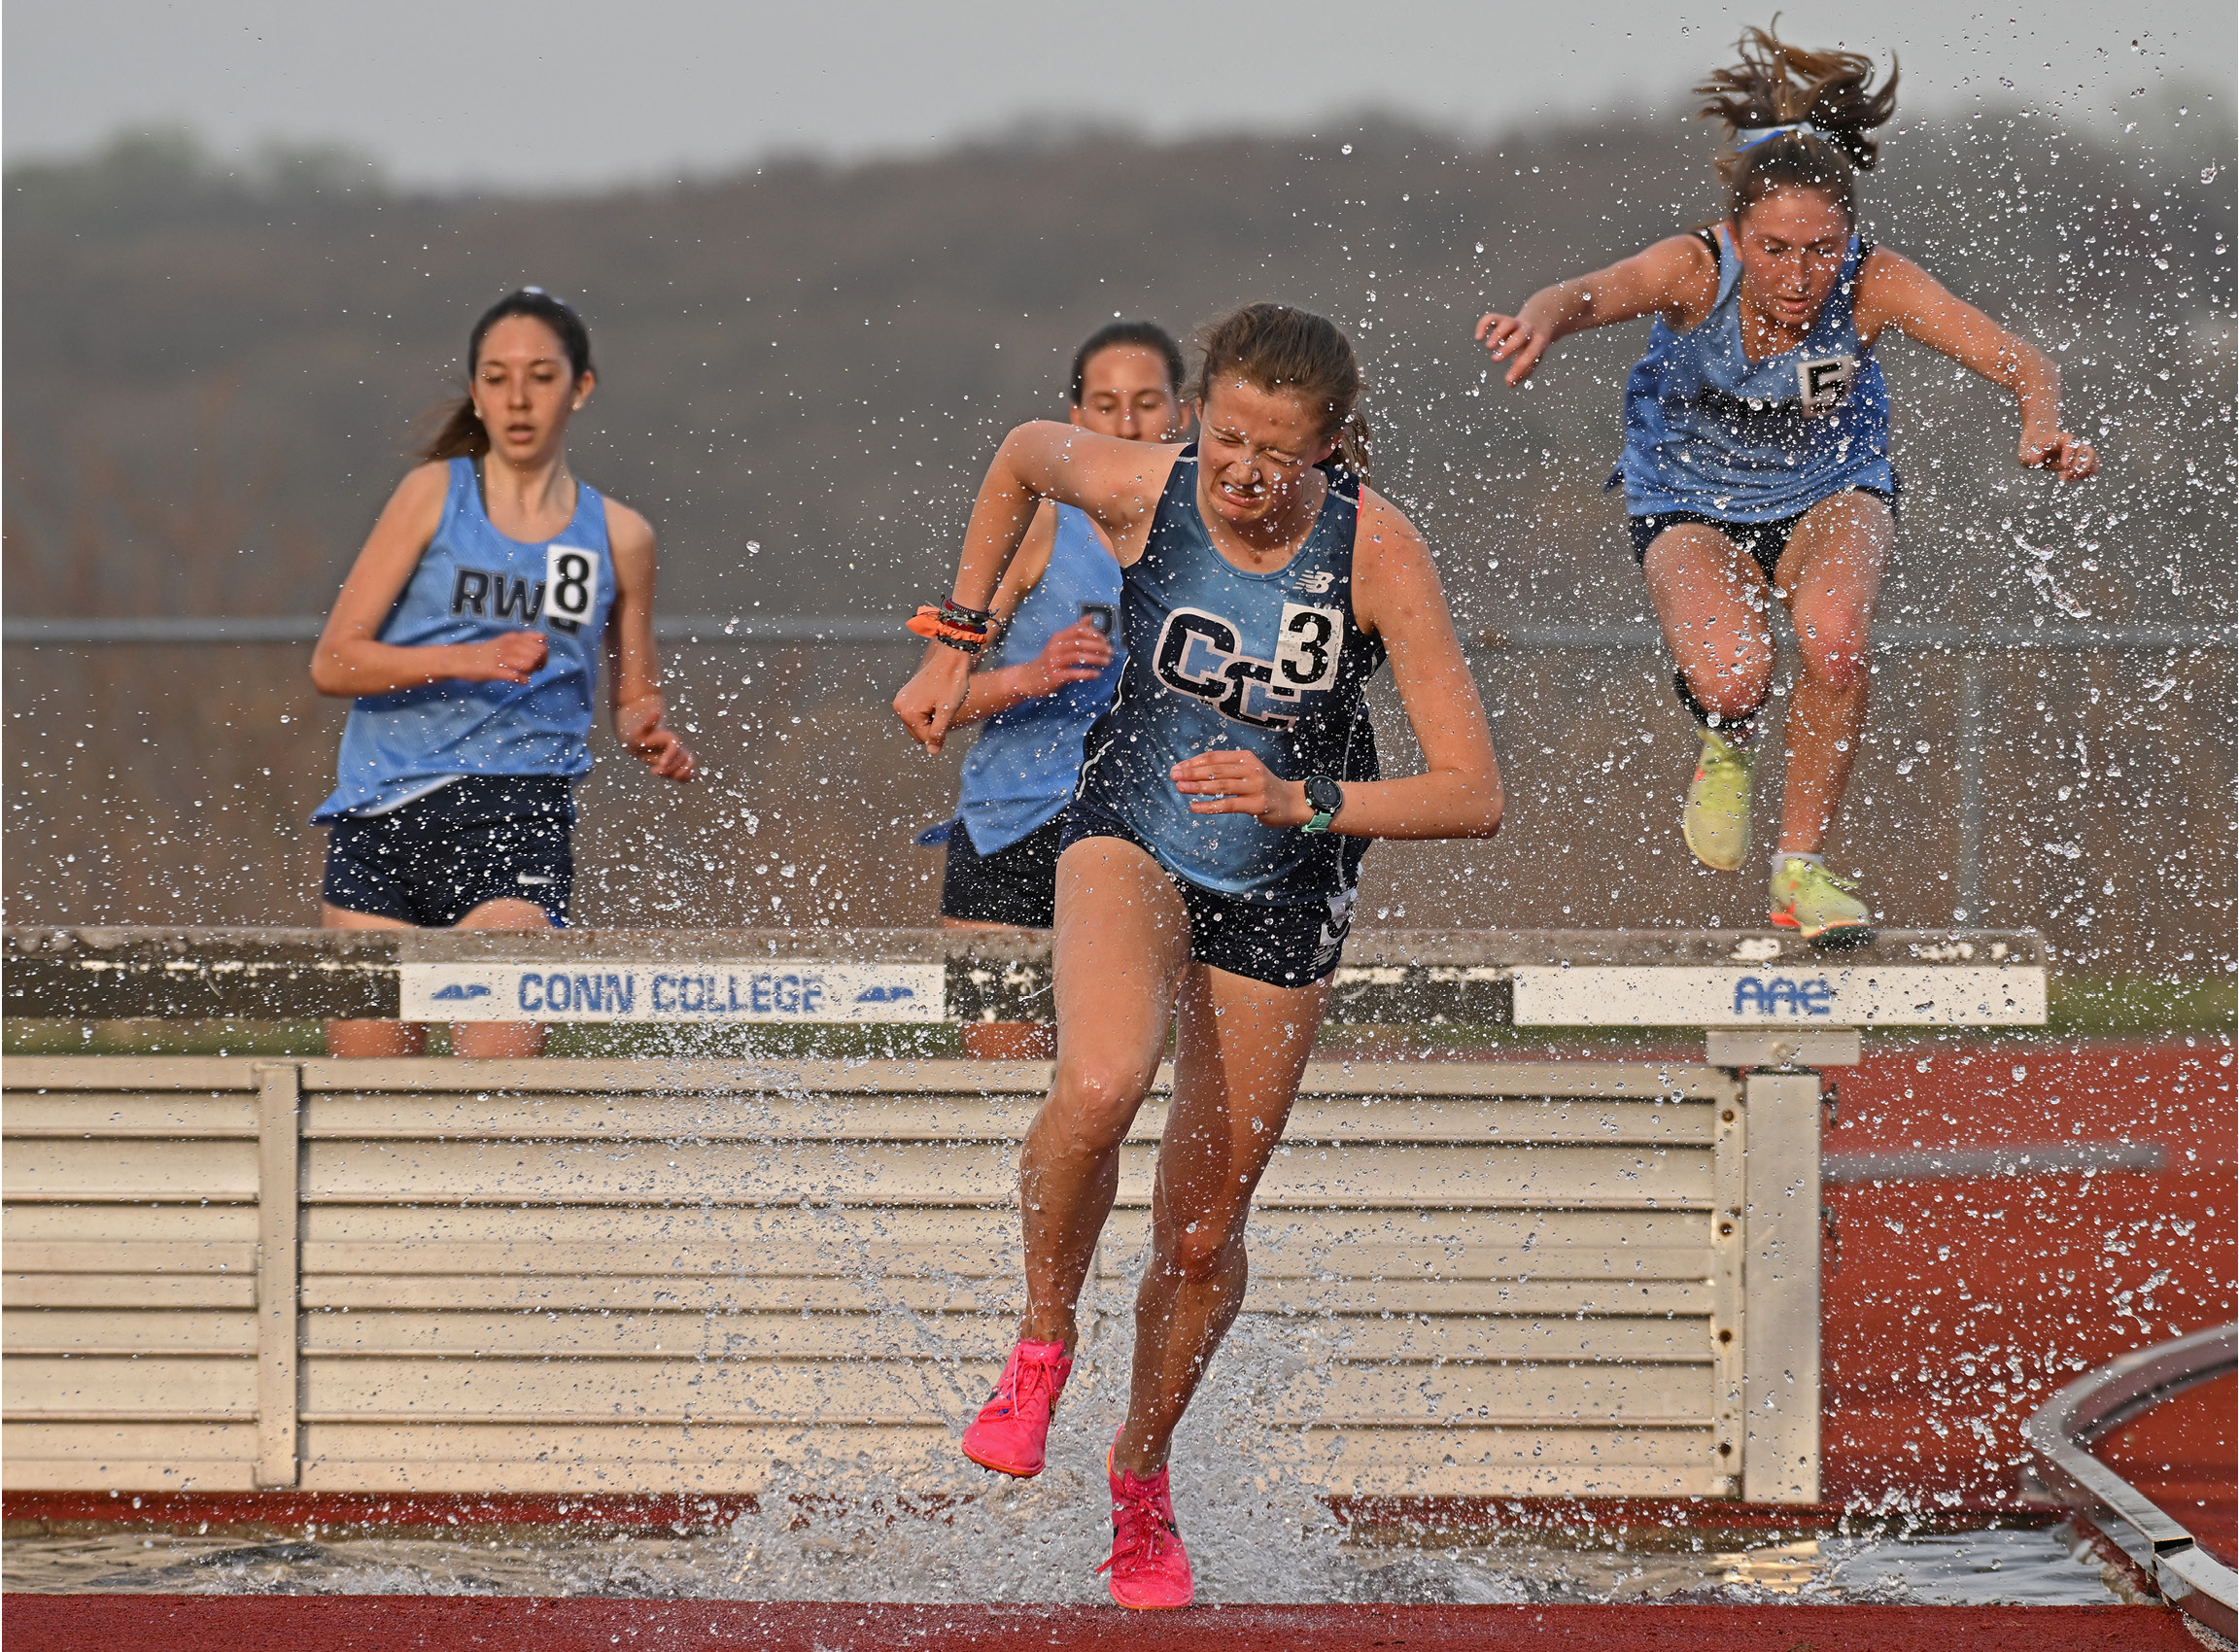 Hurdlers land in the water at a track meet in April.